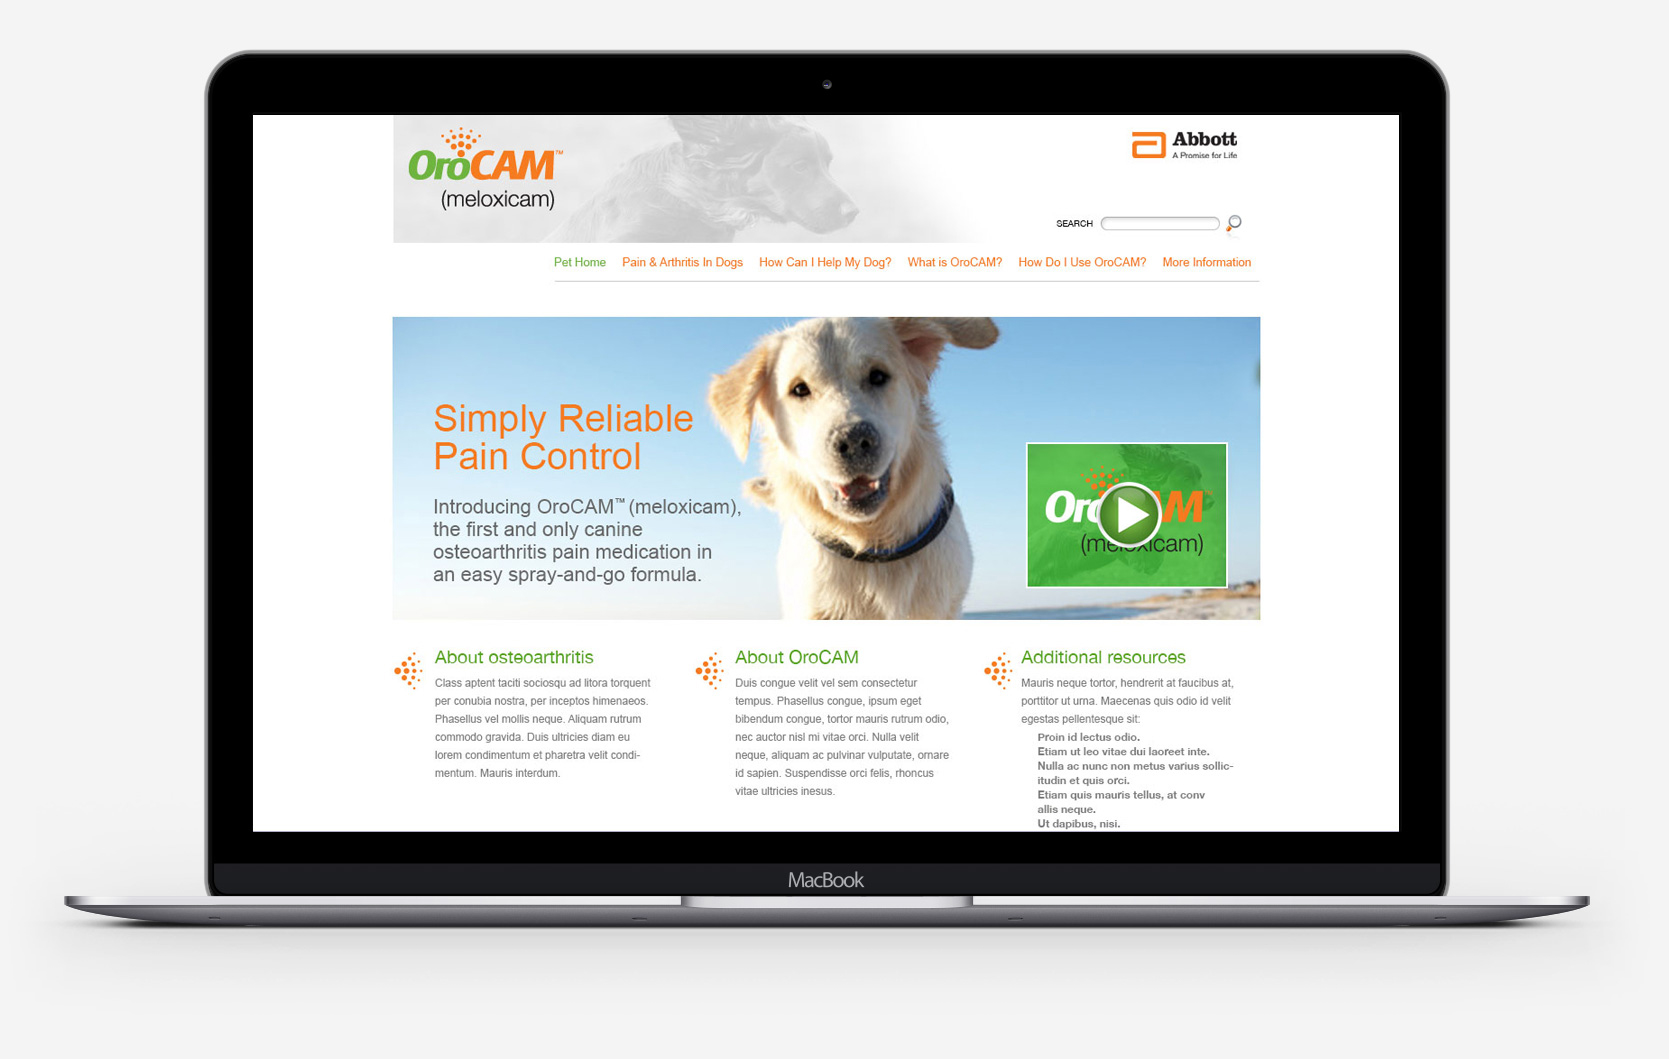 Abbott OroCAM home page of their website